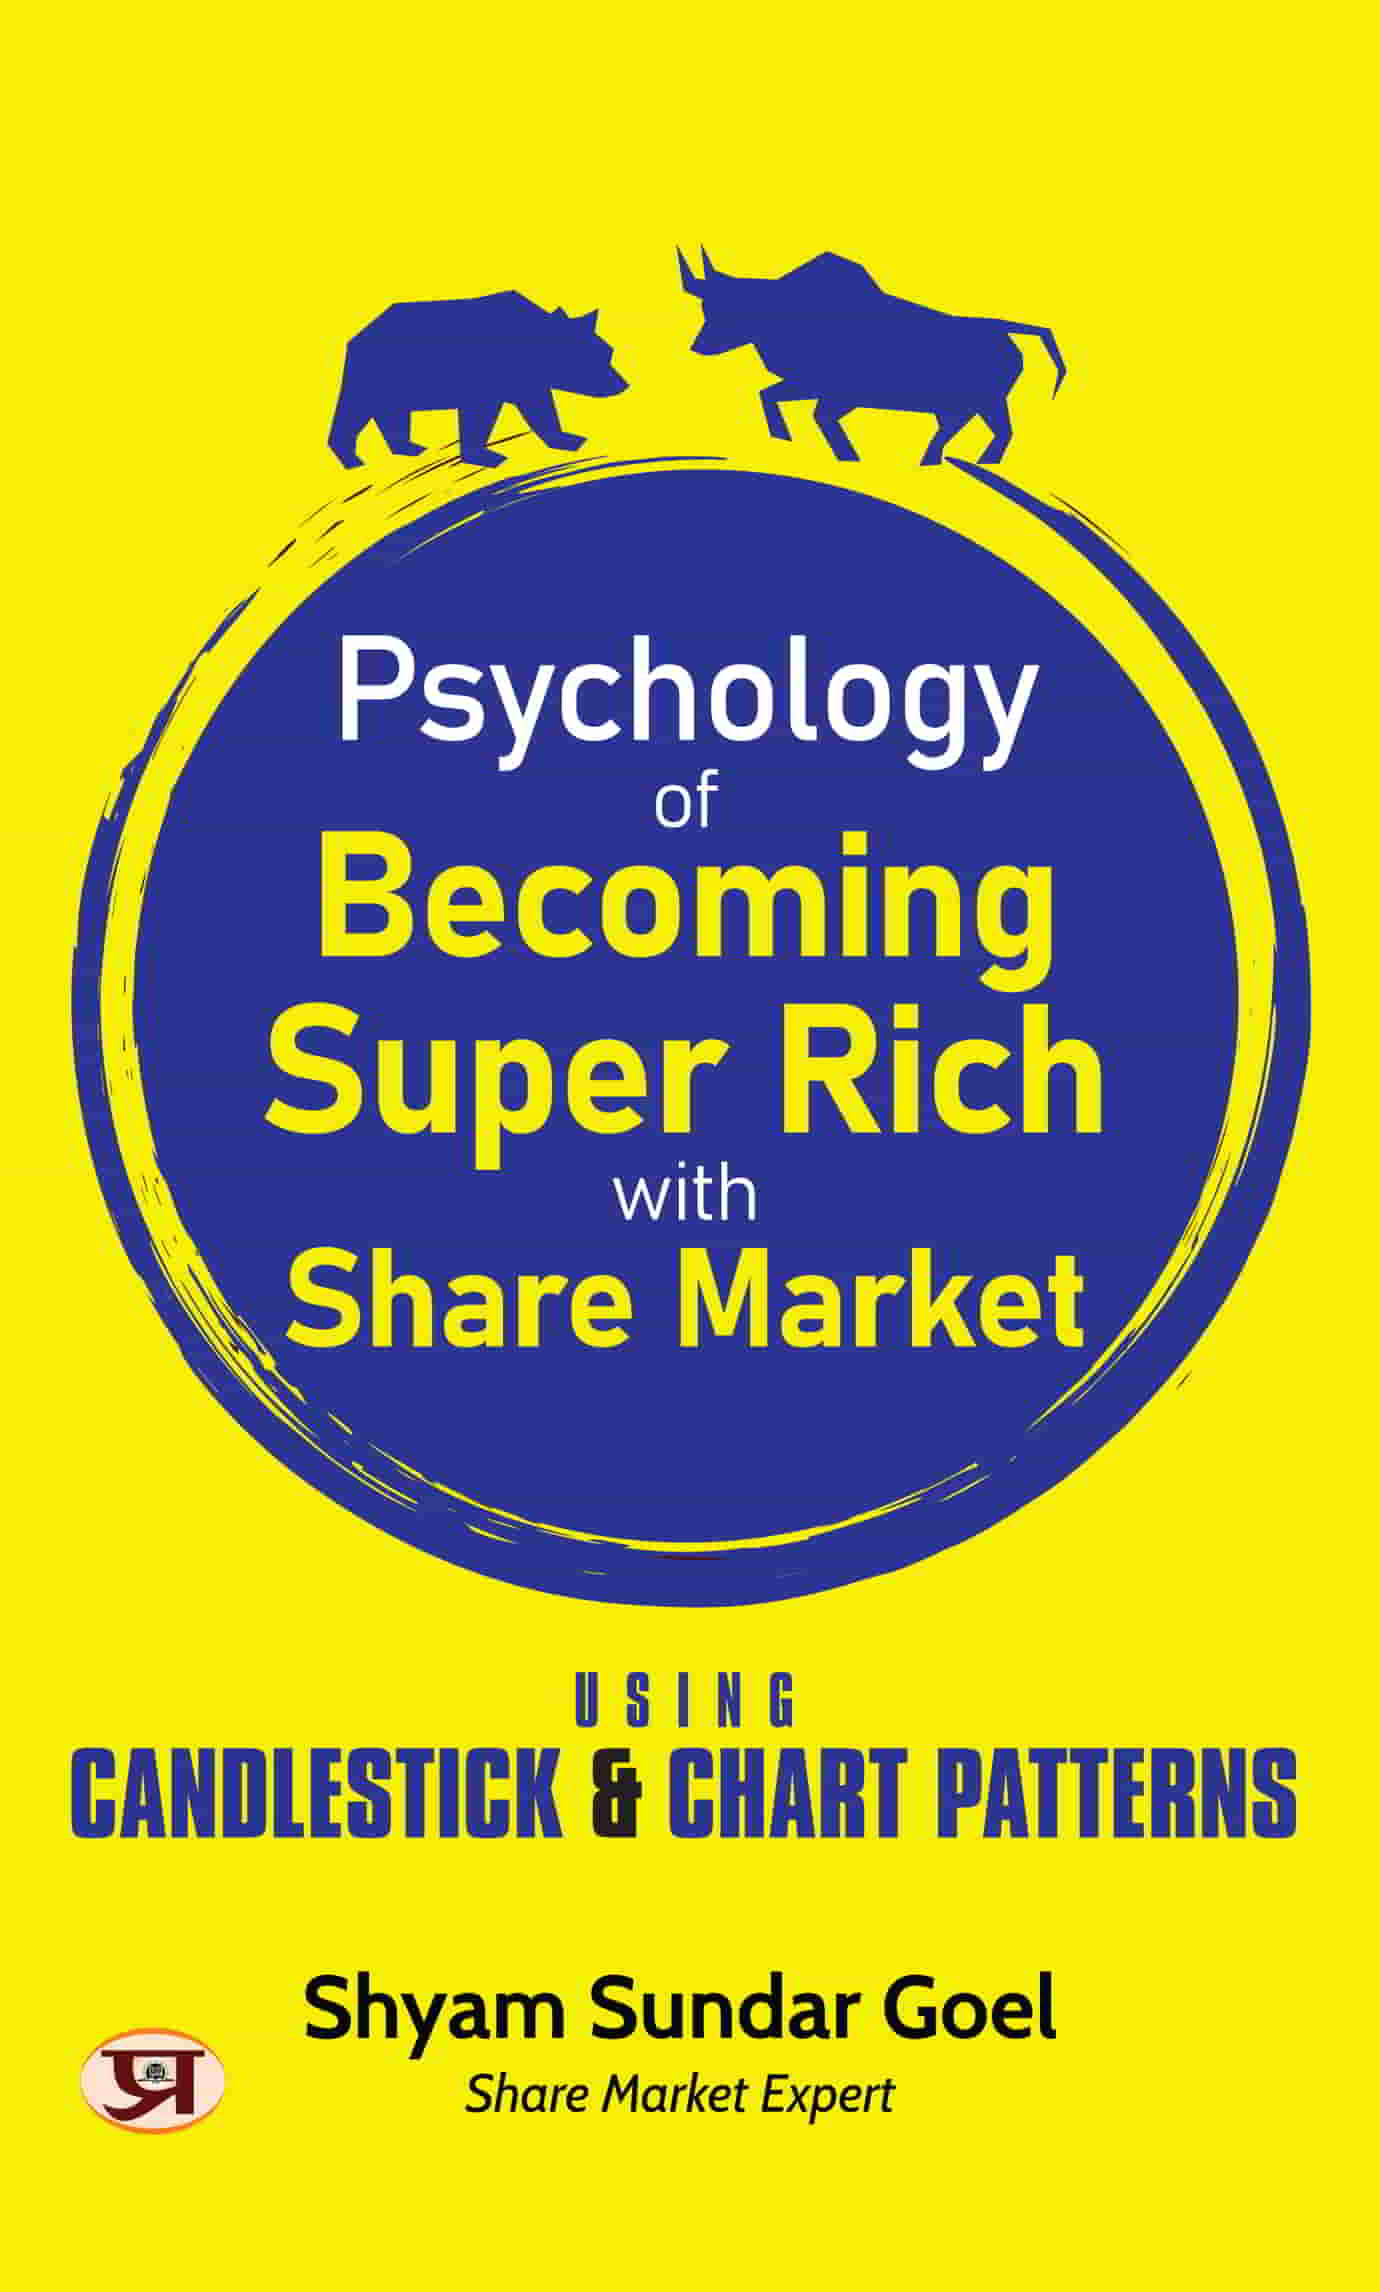 Psychology of Becoming Super Rich with Share Market | Using Candlestick & Chart Patterns